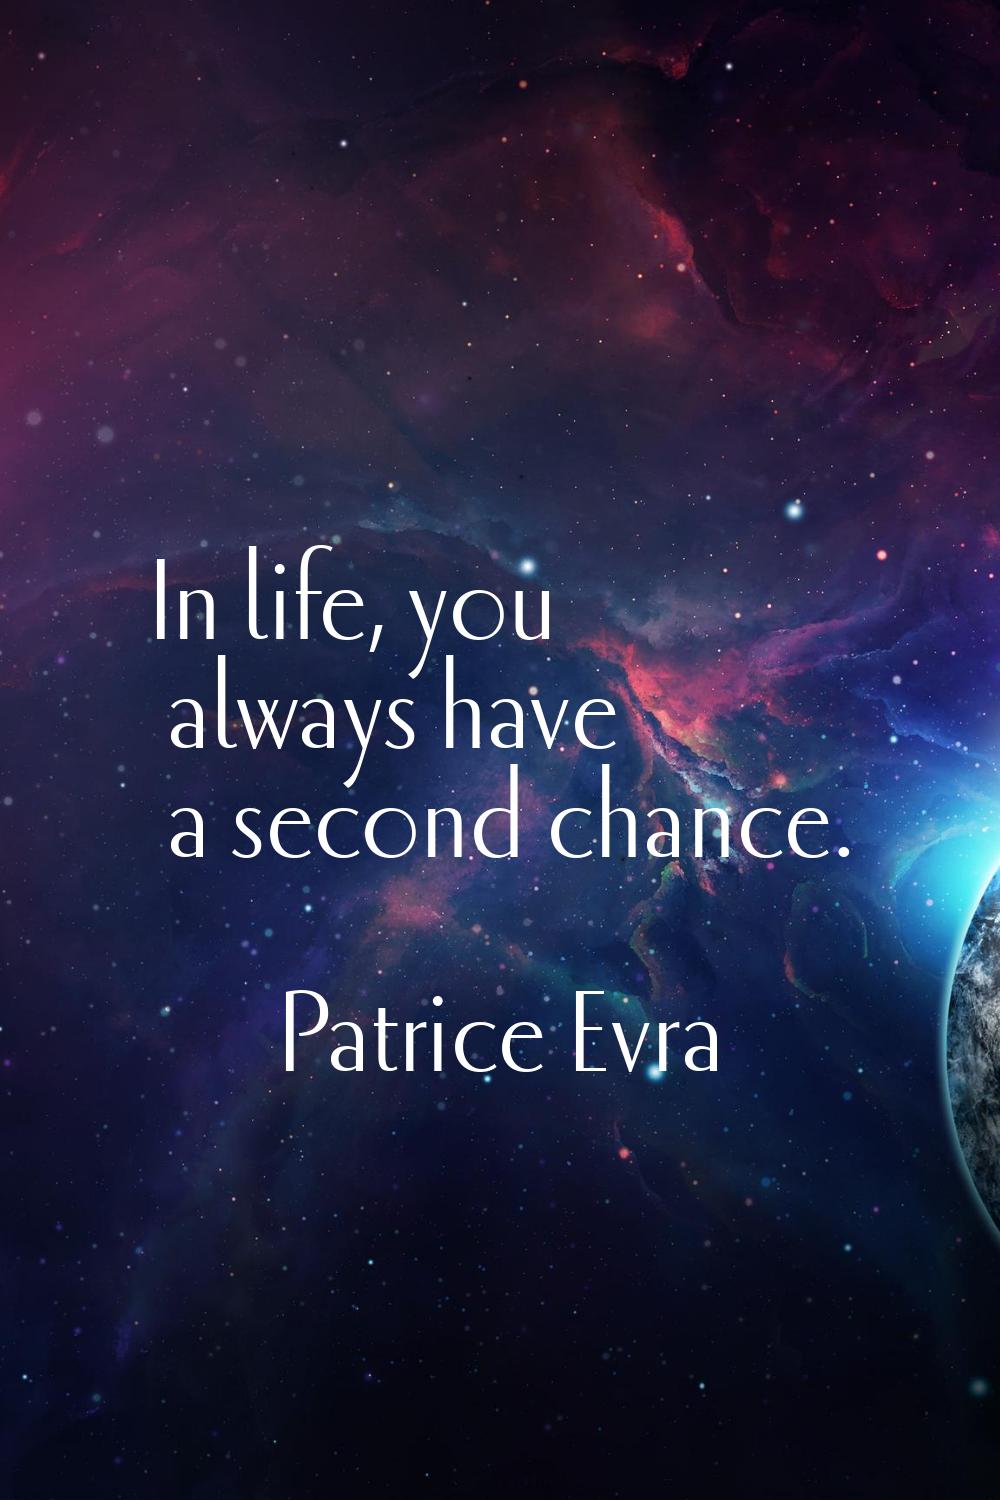 In life, you always have a second chance.